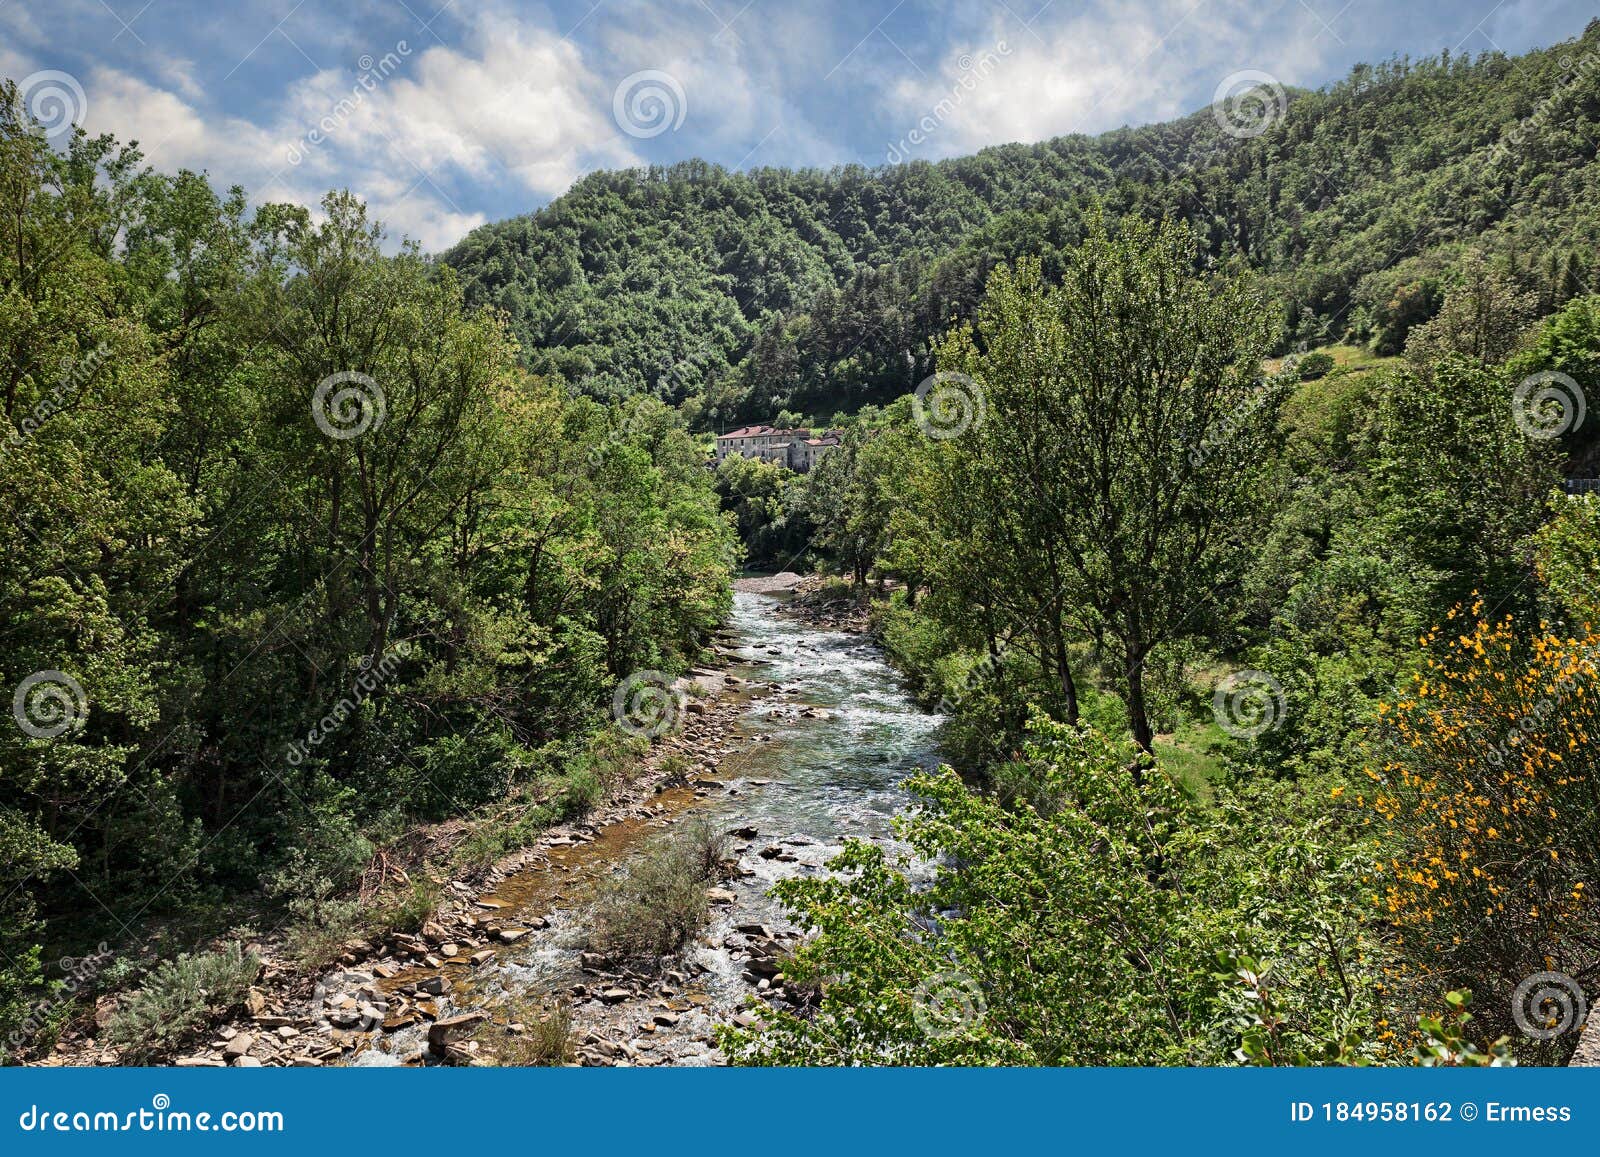 firenzuola, florence, tuscany, italy: landscape of the the forest on apennine mountains with the santerno river